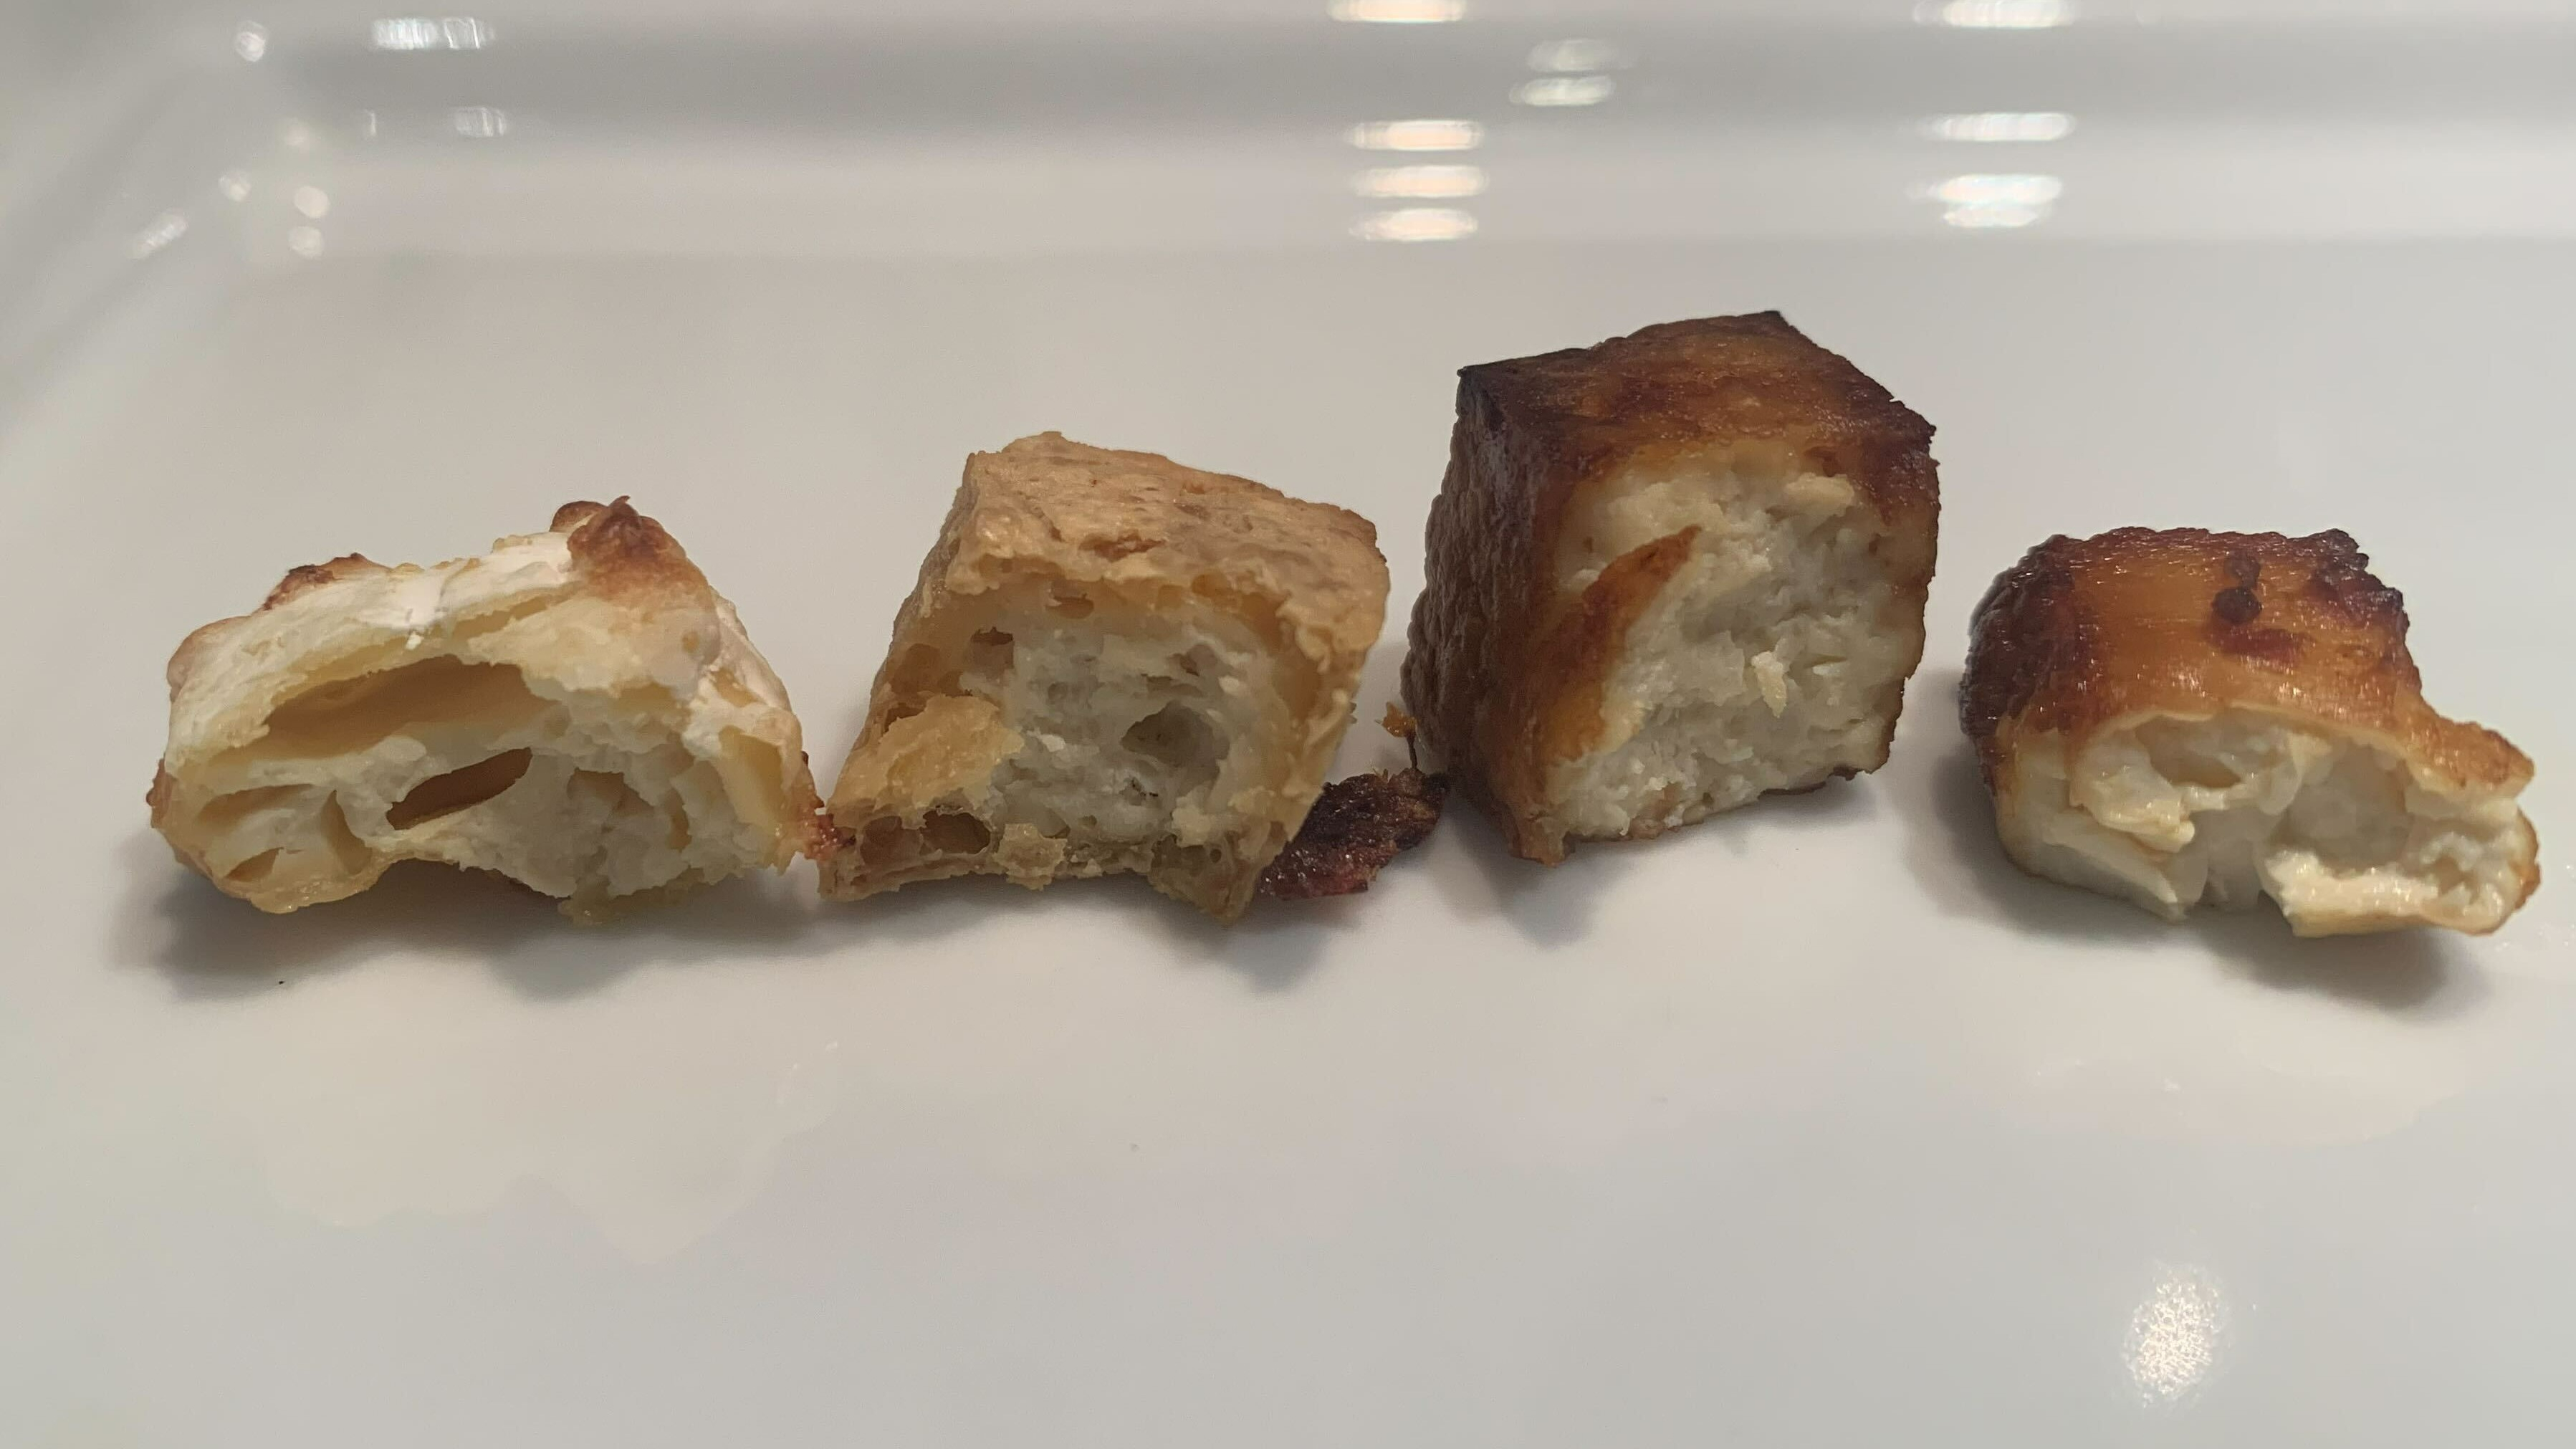 Cooked tofu, from left to right; silky unseasoned tofu with cornstarch, unseasoned spongy tofu, seasoned spongy tofu and finally the seasoned silky tofu.